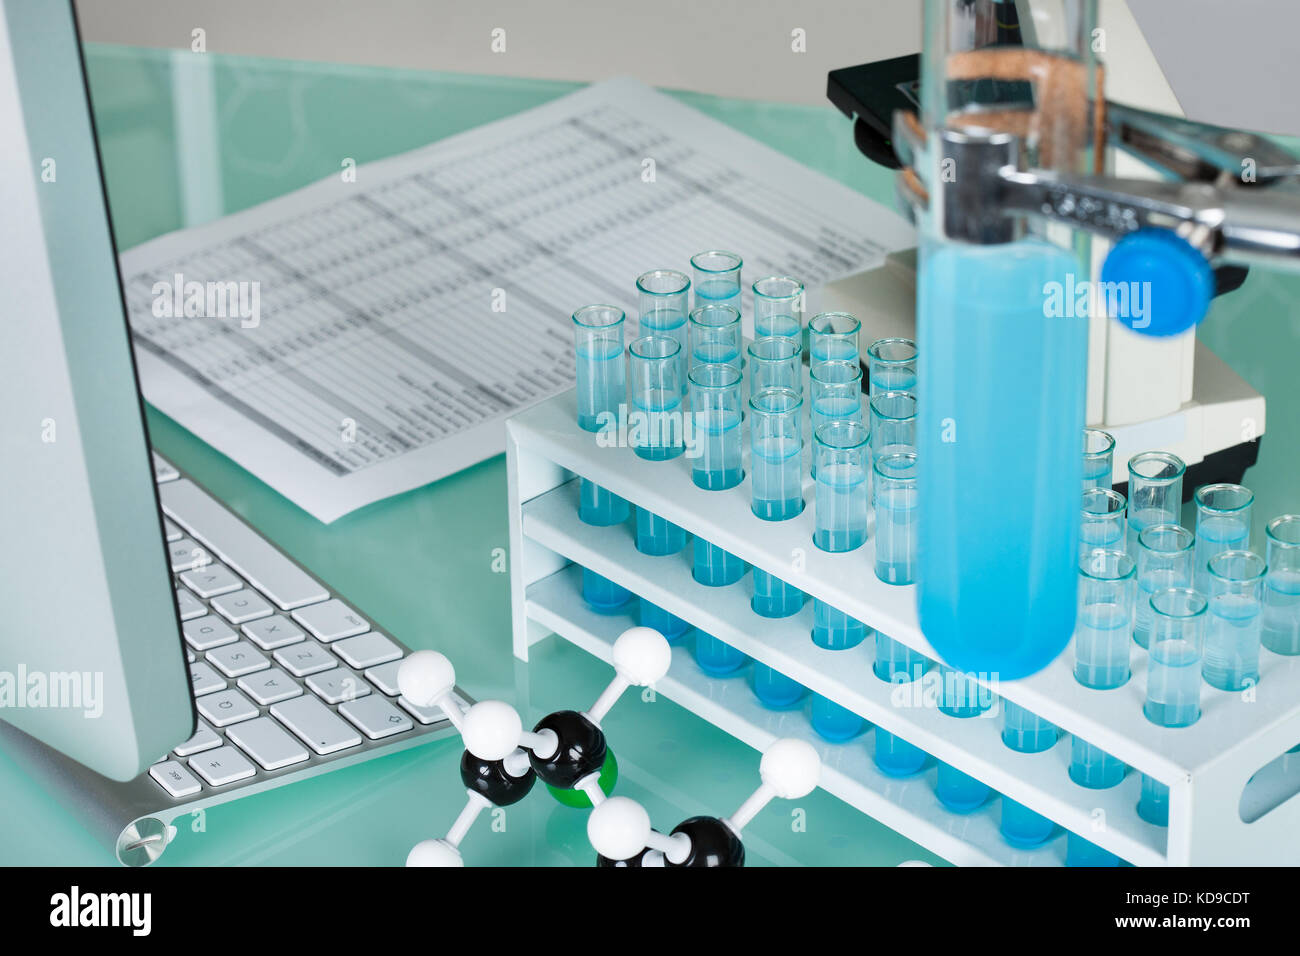 Photos of scientists working place in research laboratory Stock Photo